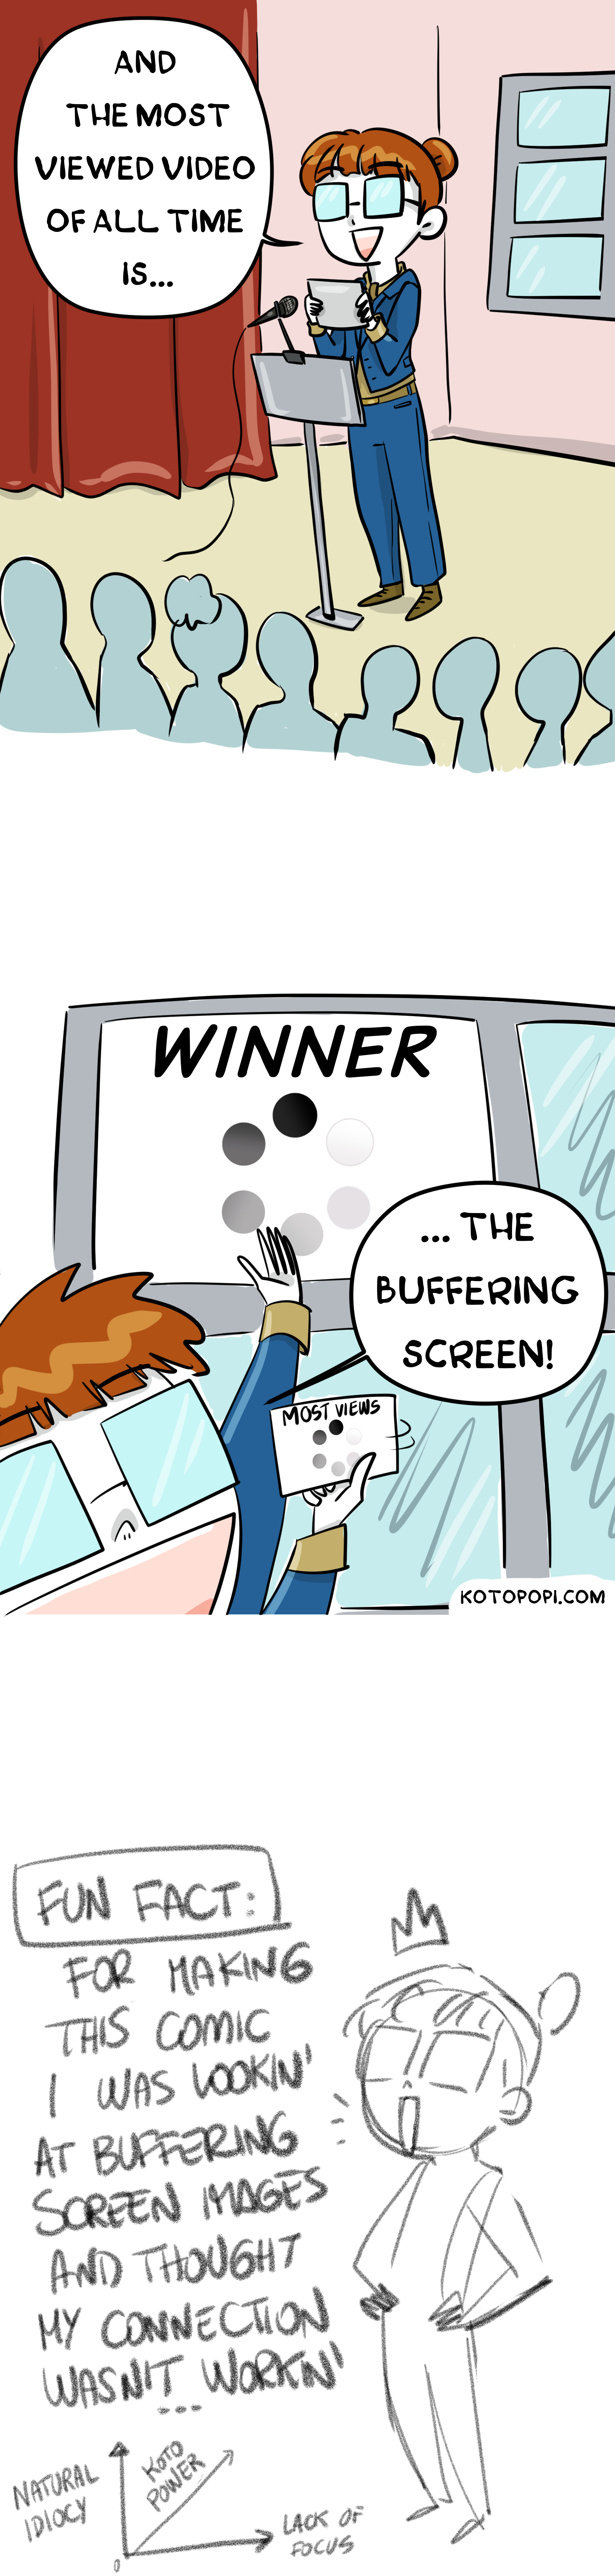 funny pic images meme about views youtube buffer buffering screen logo